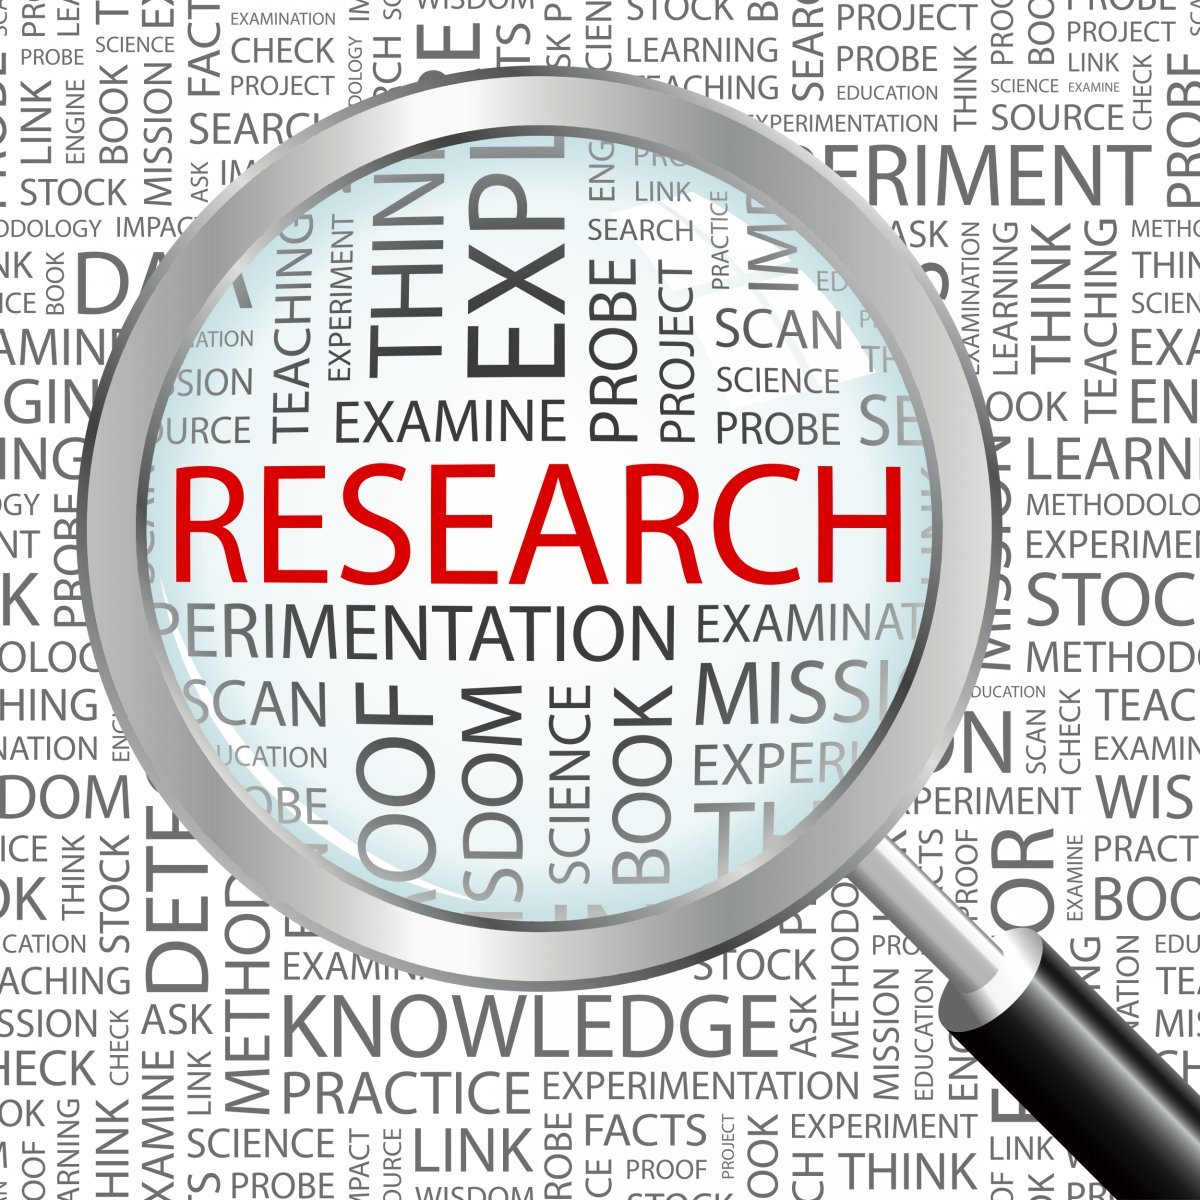 Research Links